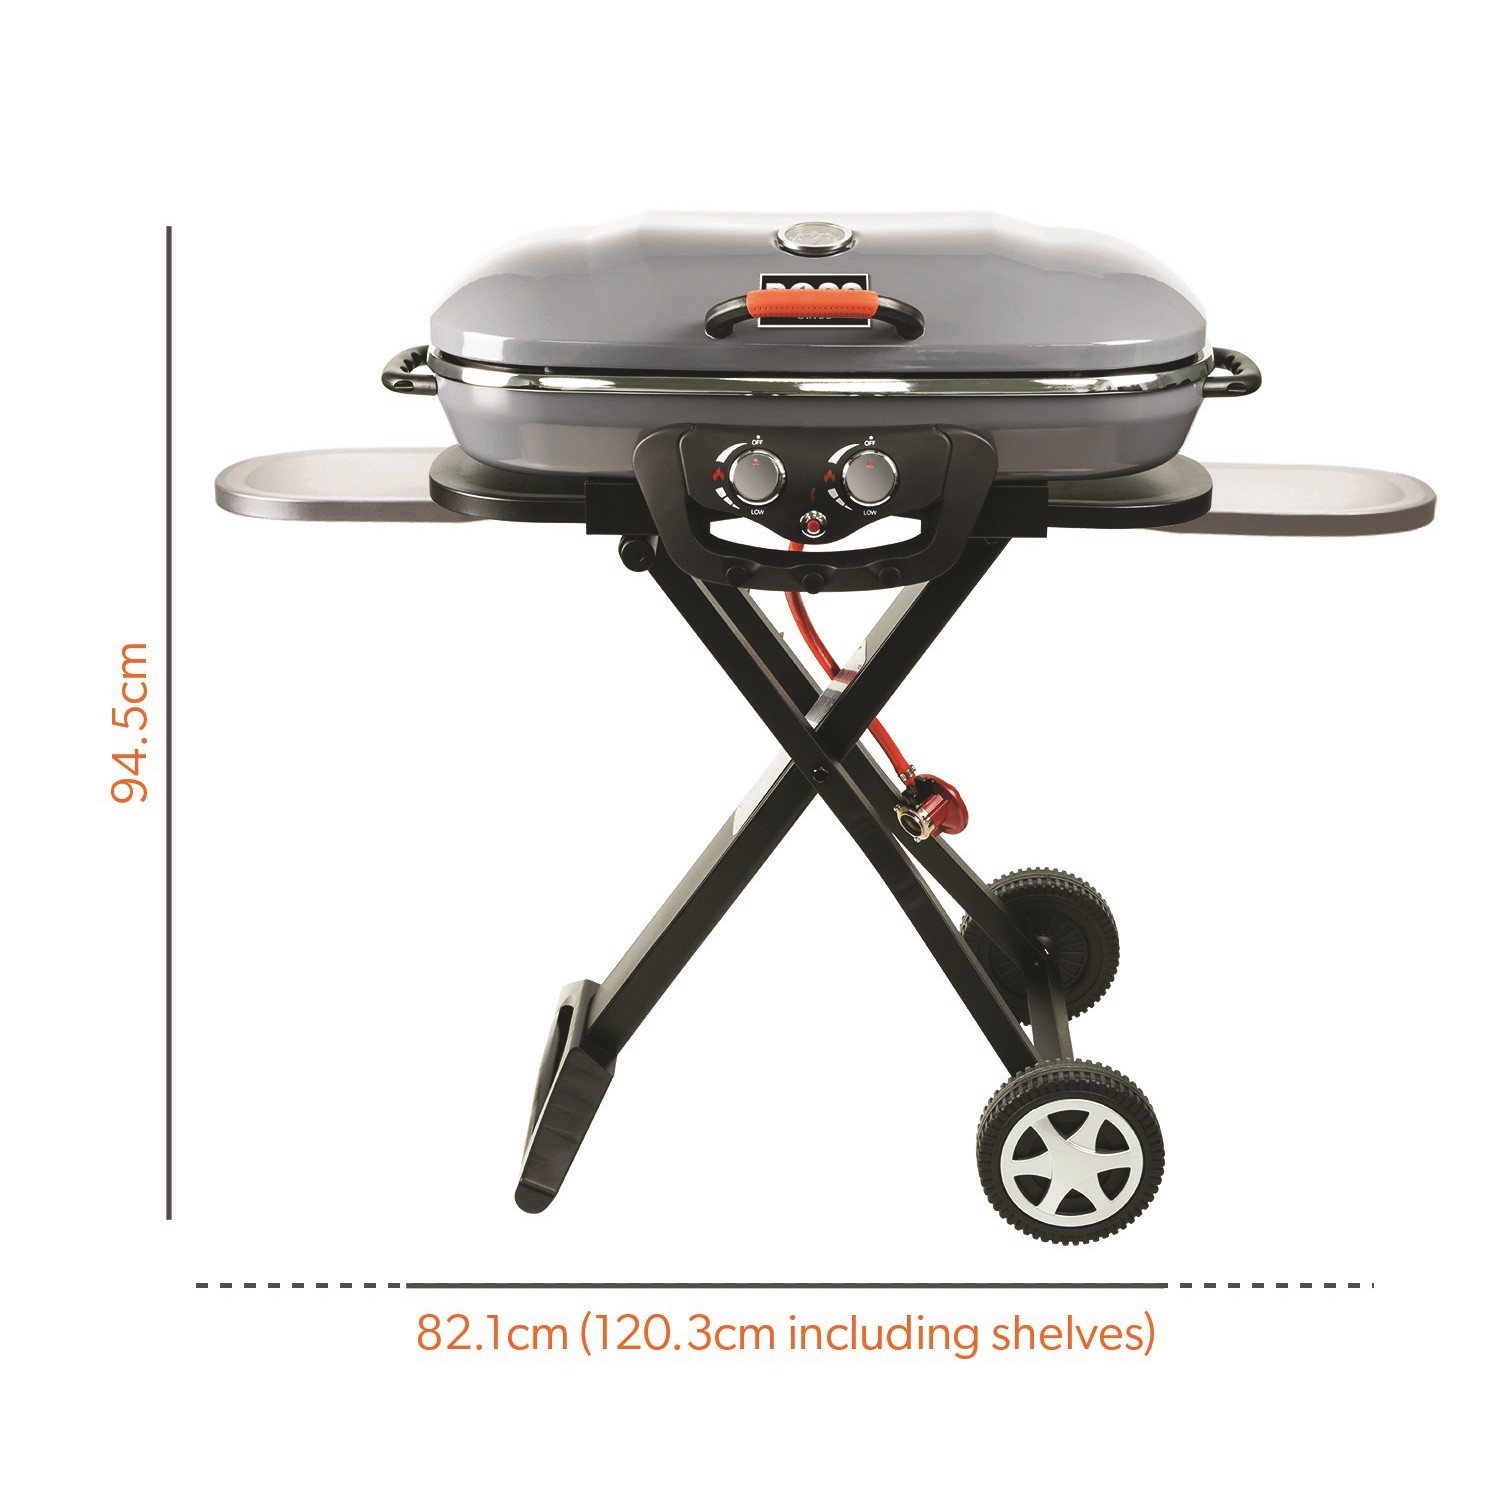 Boss Grill Deluxe - 2 Burner Gas BBQ Grill with Trolley - Grey | electriQ